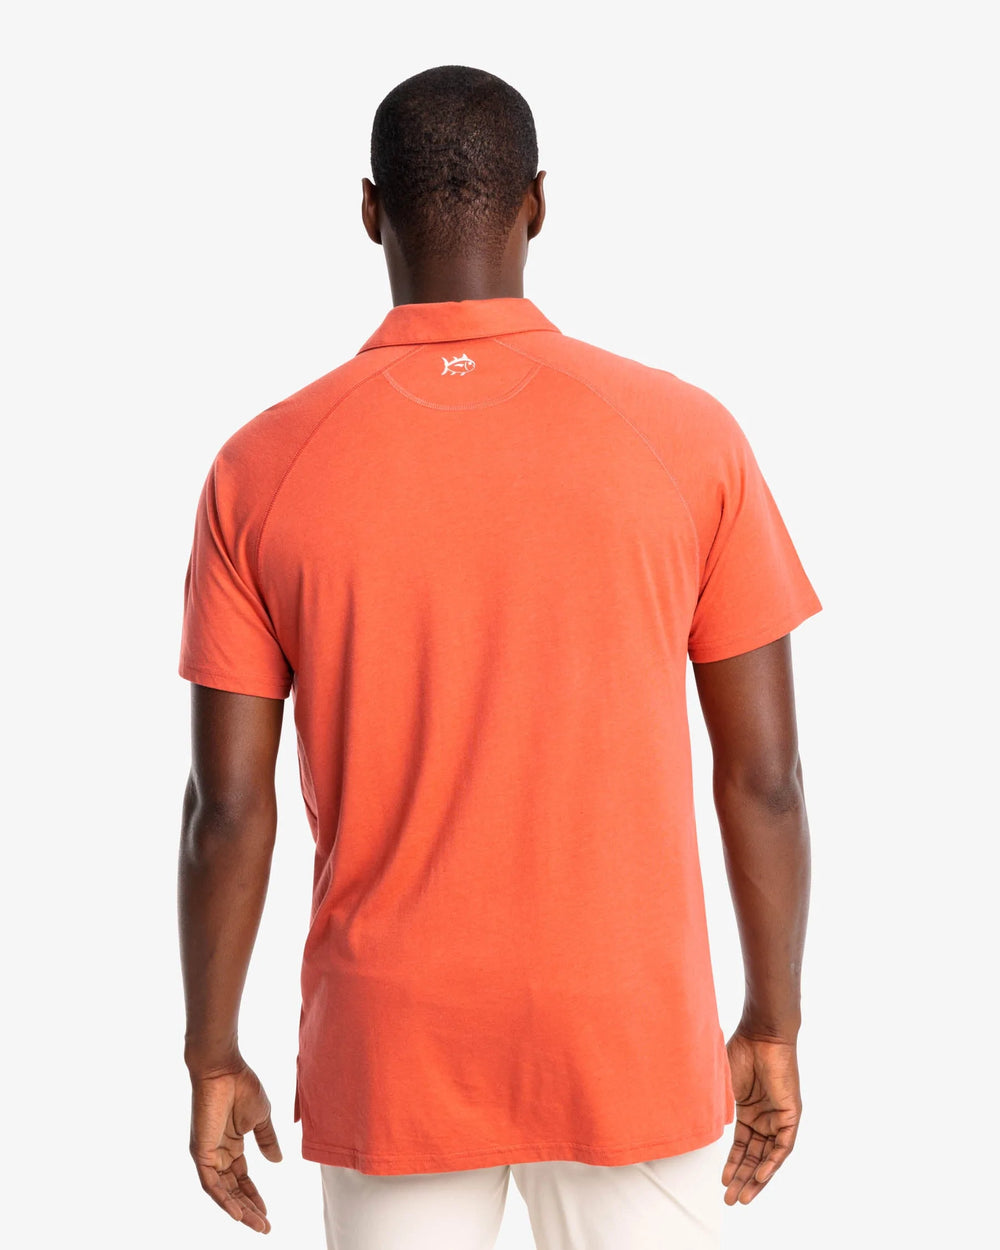 The back view of the Racquet Performance Polo Shirt by Southern Tide - Mineral Red